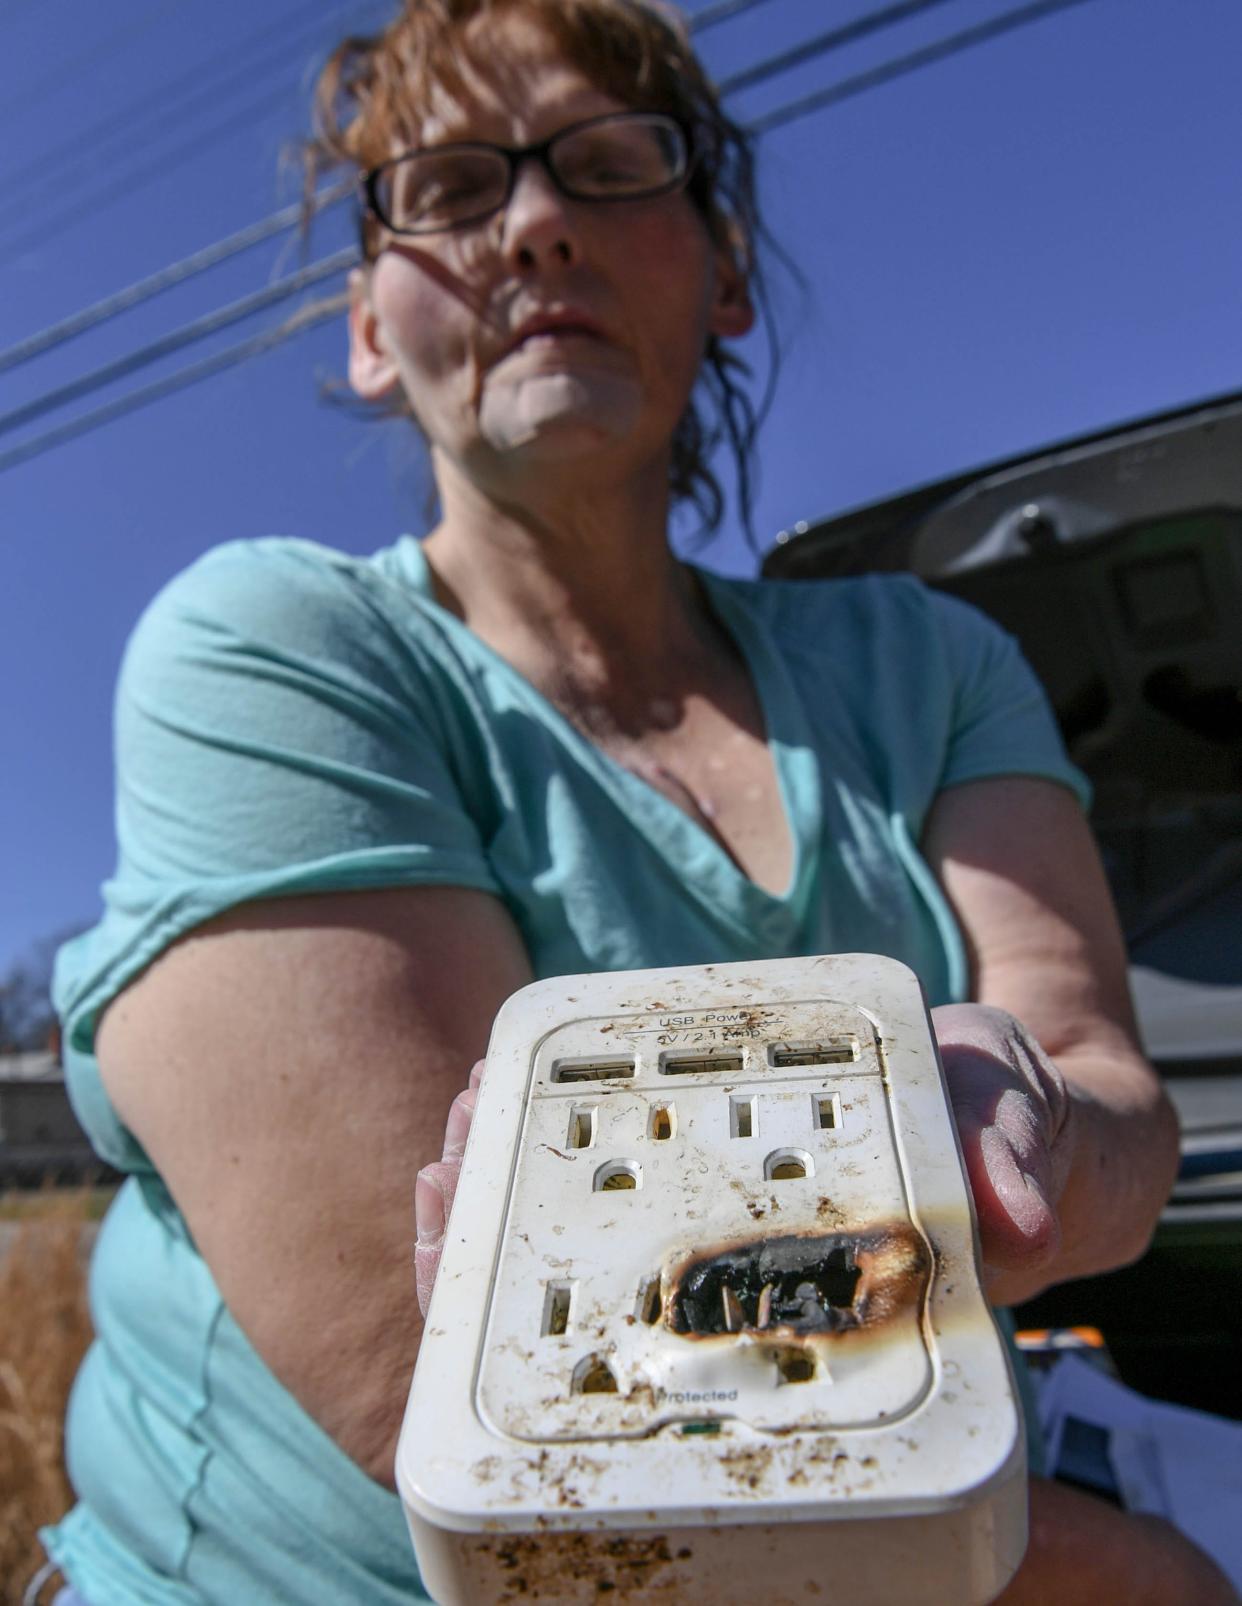 A South Carolina woman shows a power splitter that sparked and caught fire in a home she rents.